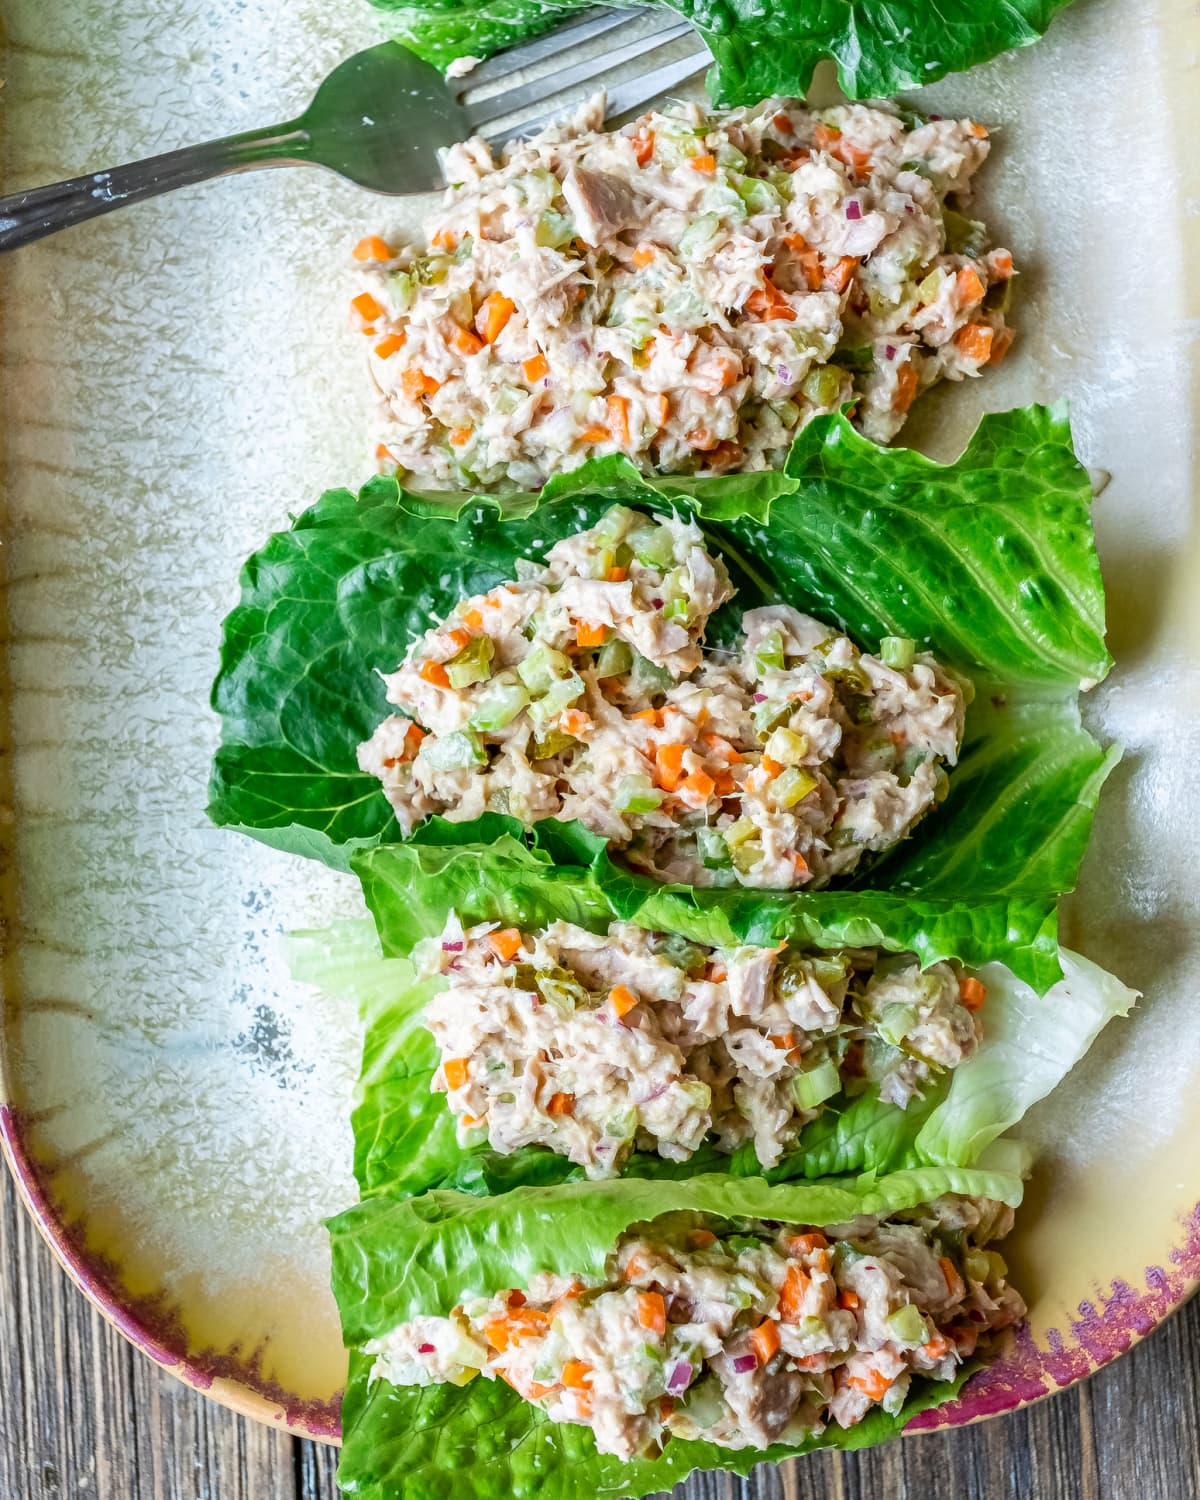 Tuna salad lettuce wraps and a fork in a serving plate on wooden table